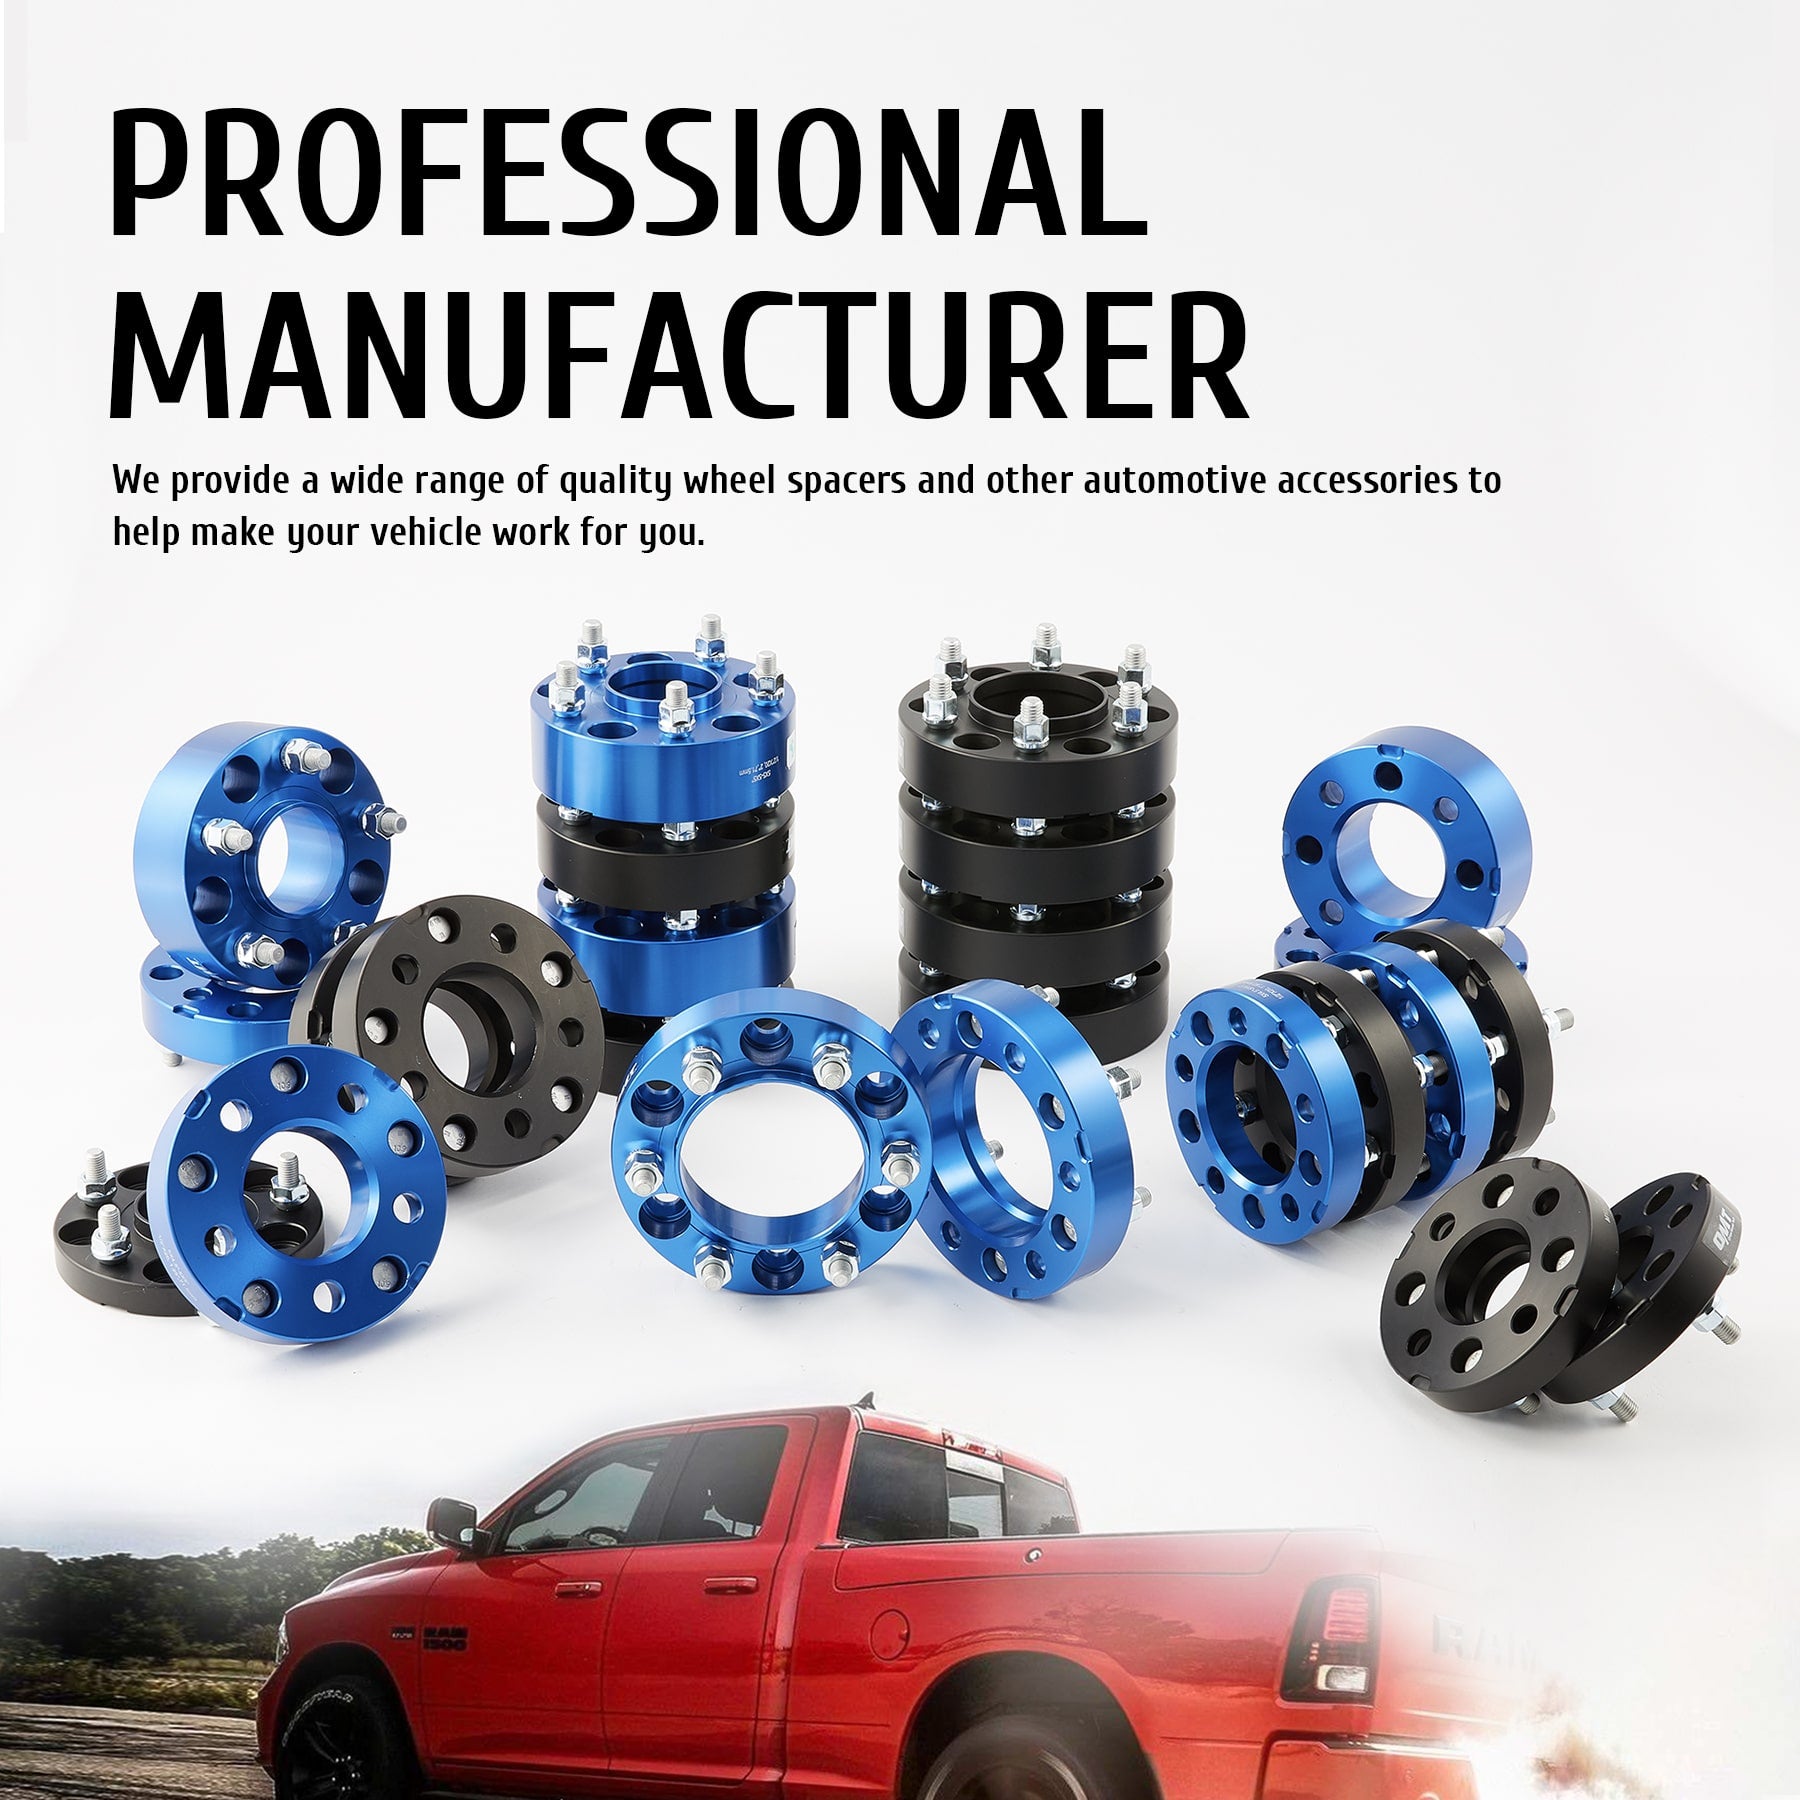 professional-manufacturer-wheel-spacers